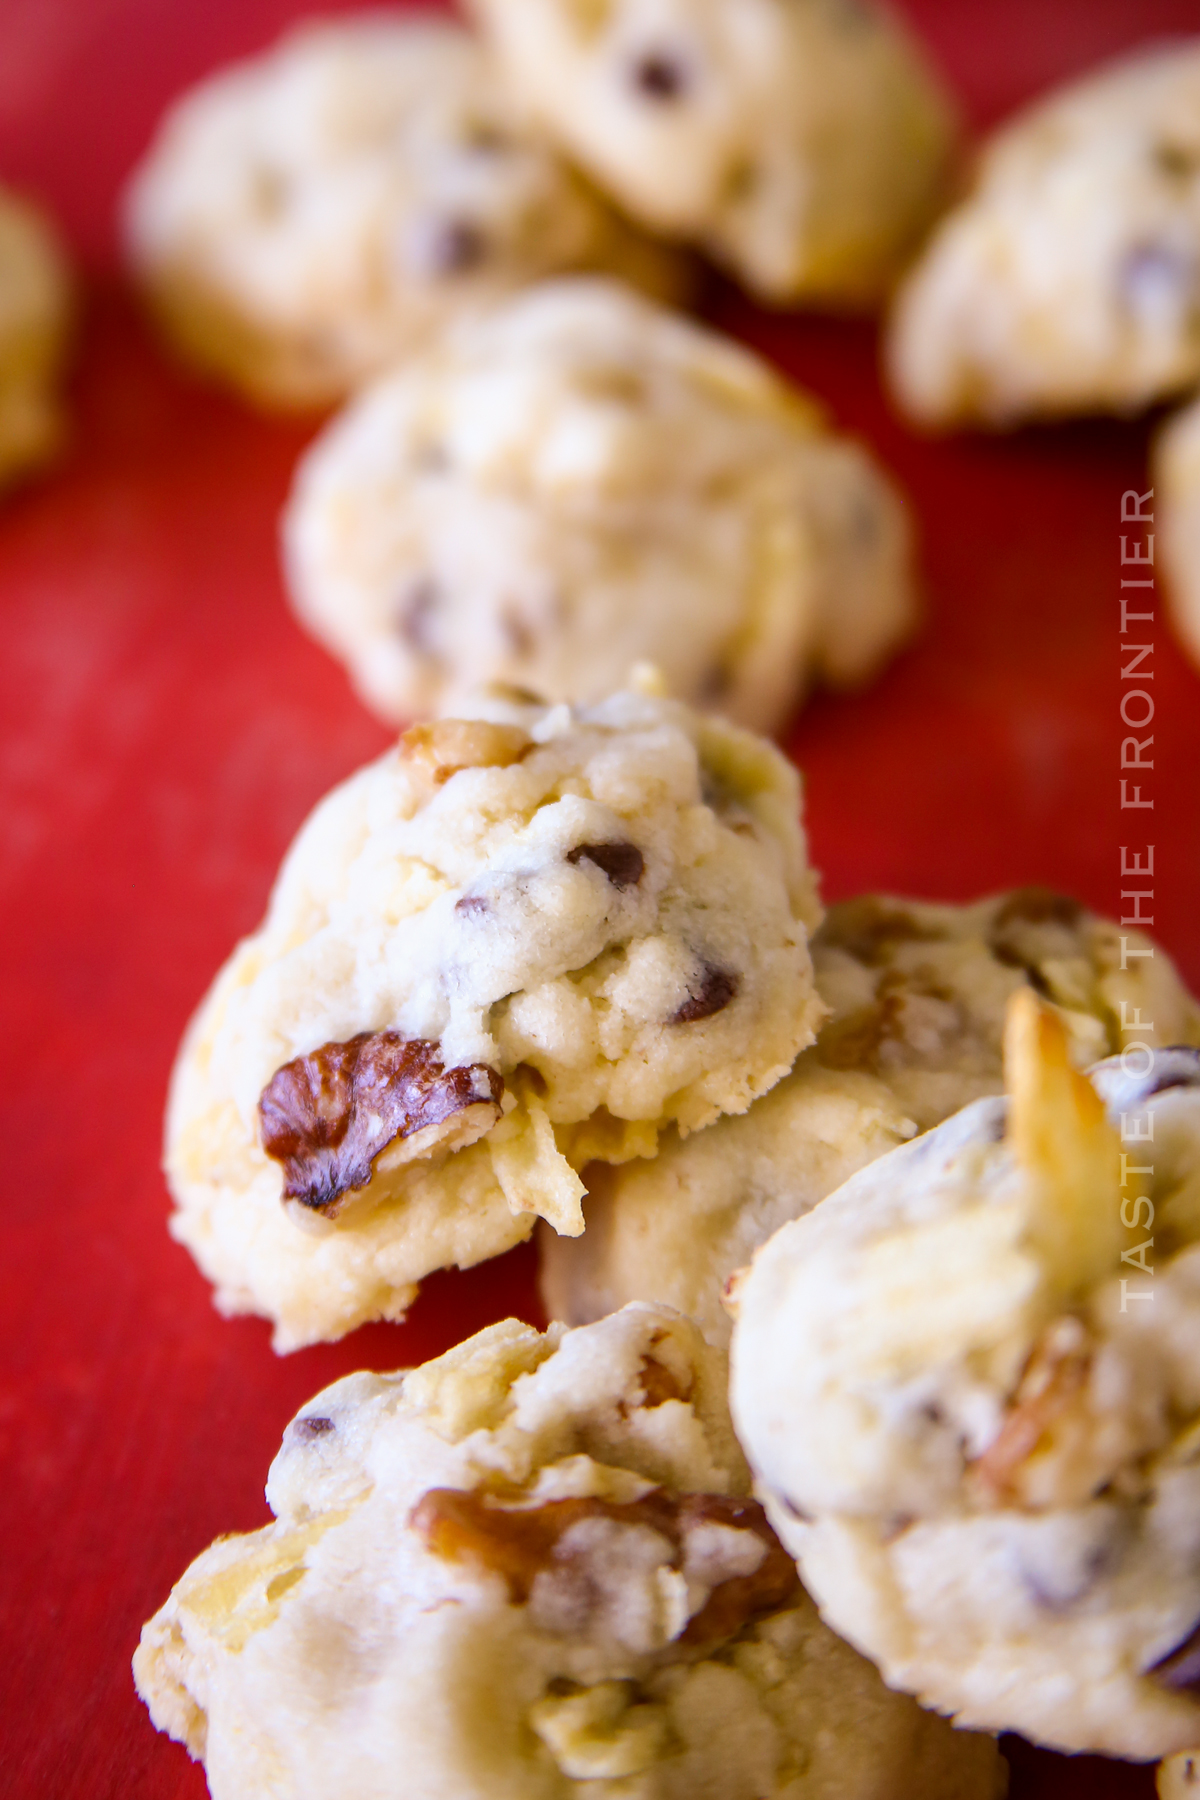 chunky cookies with walnuts and chocolate chips